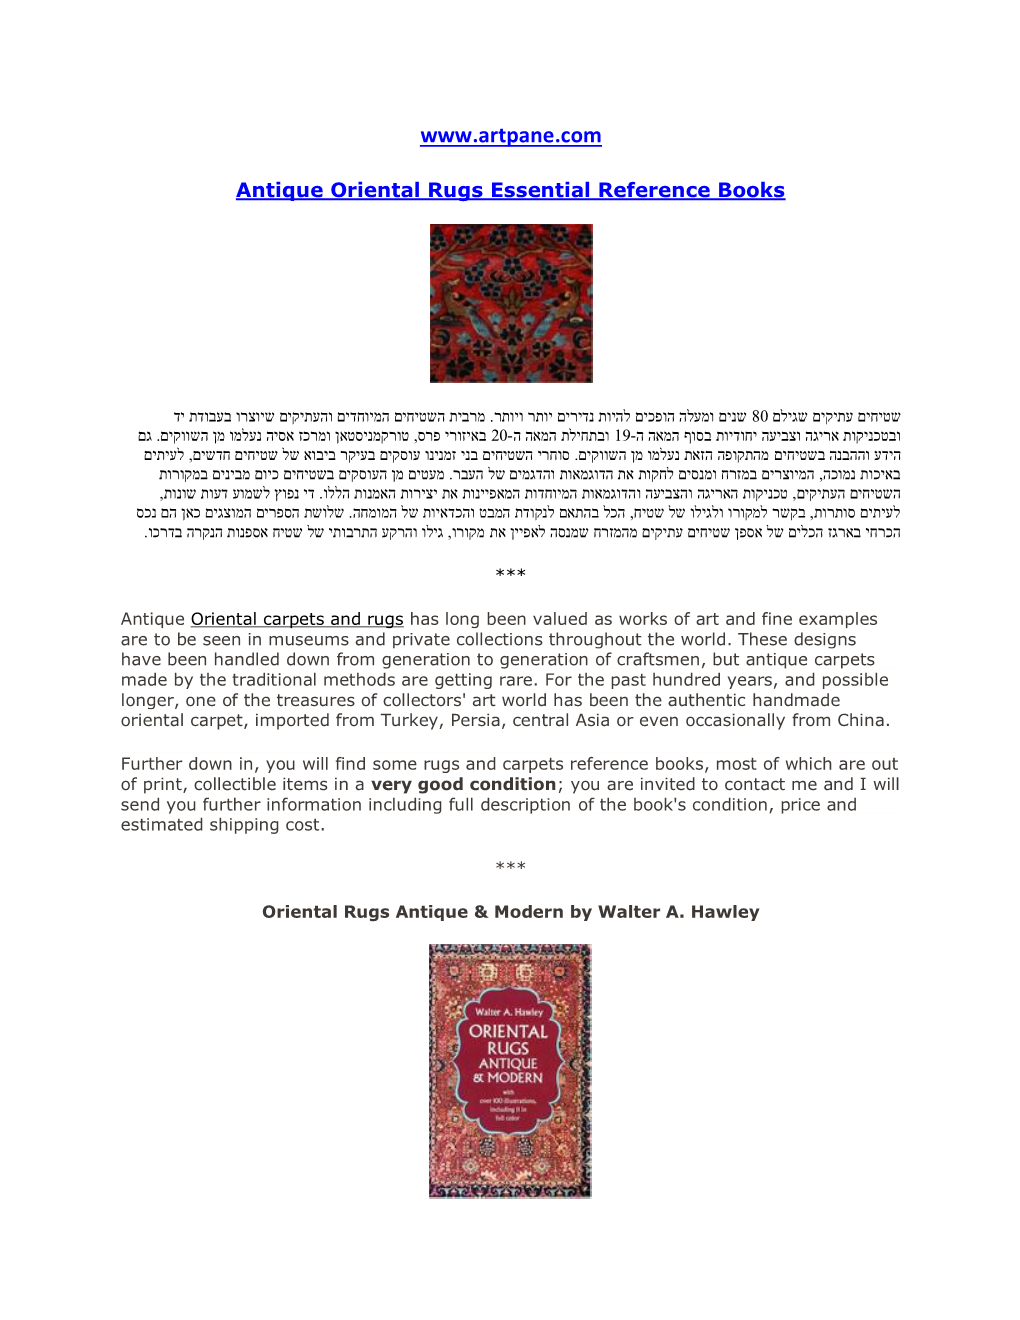 Antique Oriental Rugs Essential Reference Books